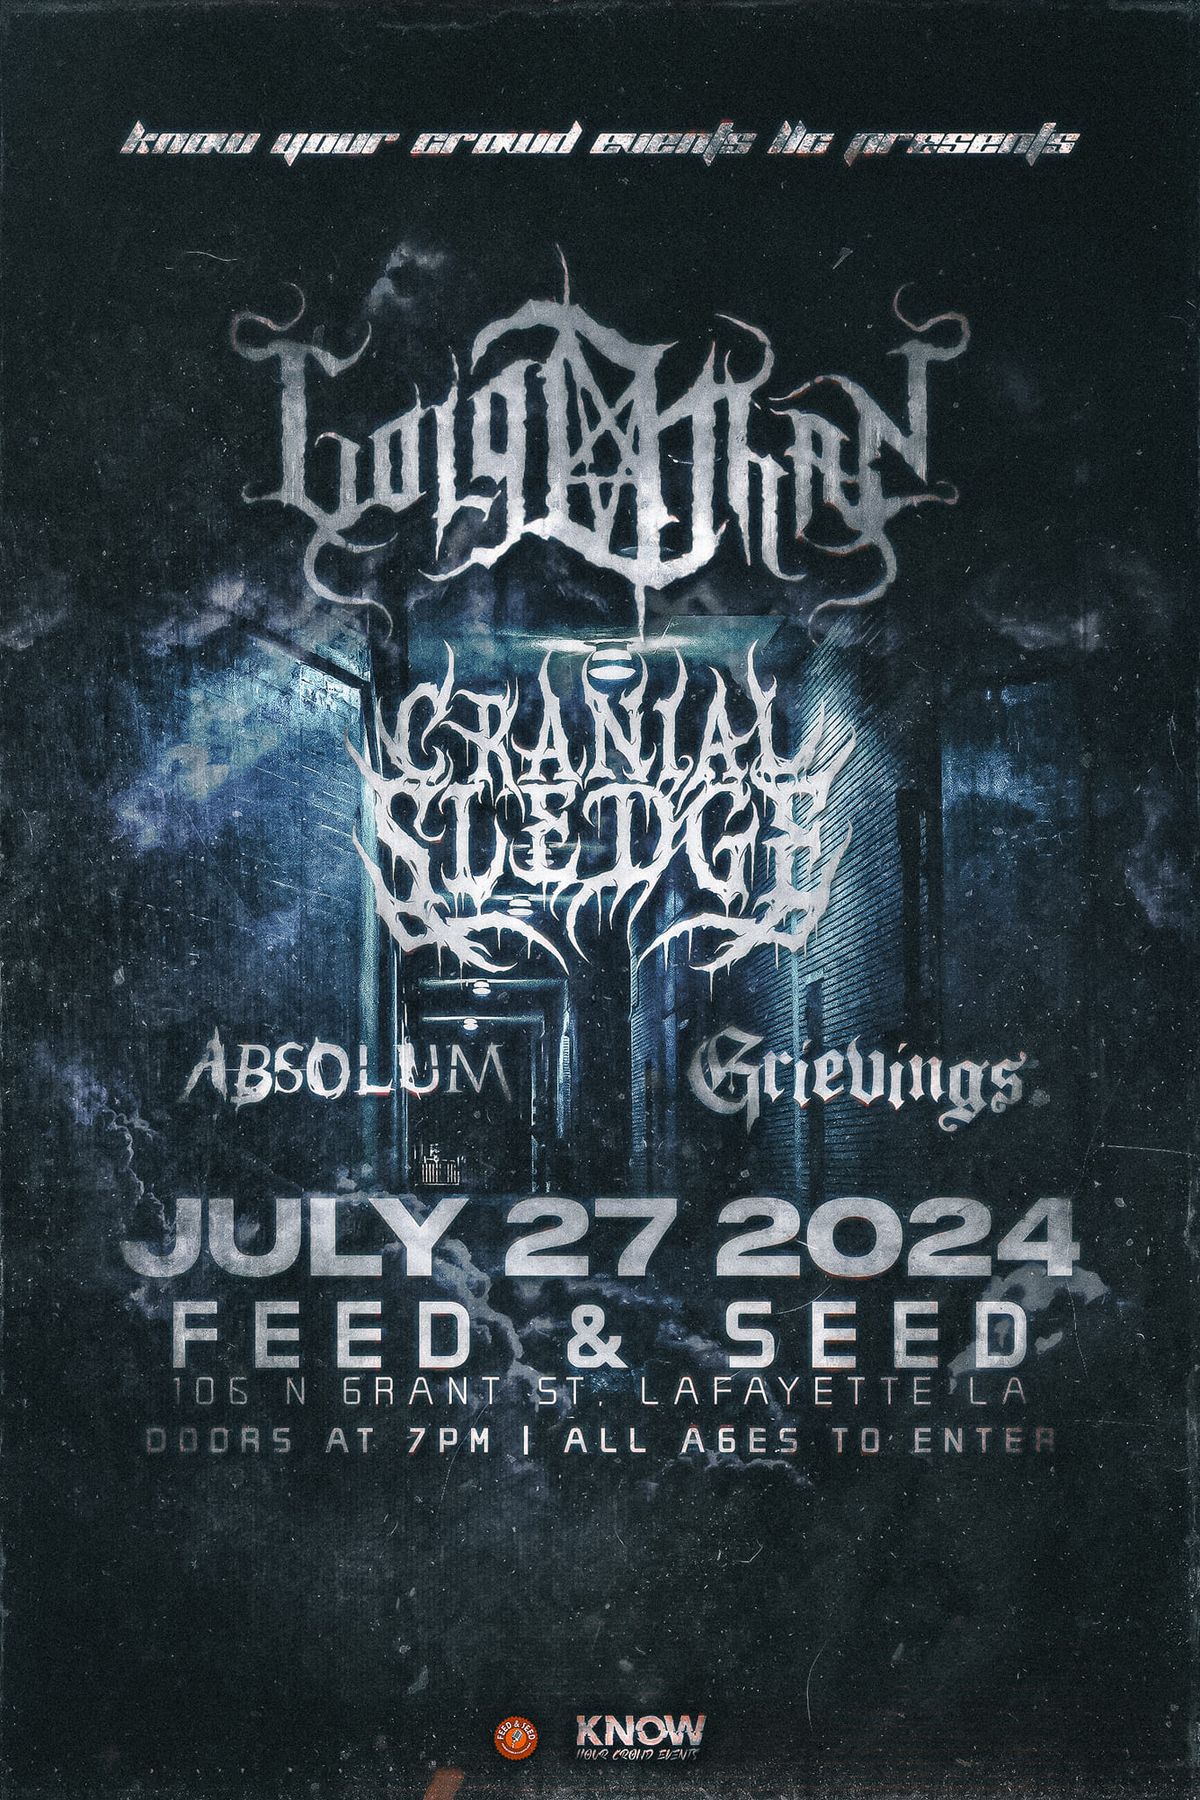 GOLGOTHAN, CRANIAL SLEDGE, ABSOLUM, GRIEVINGS @ FEED & SEED